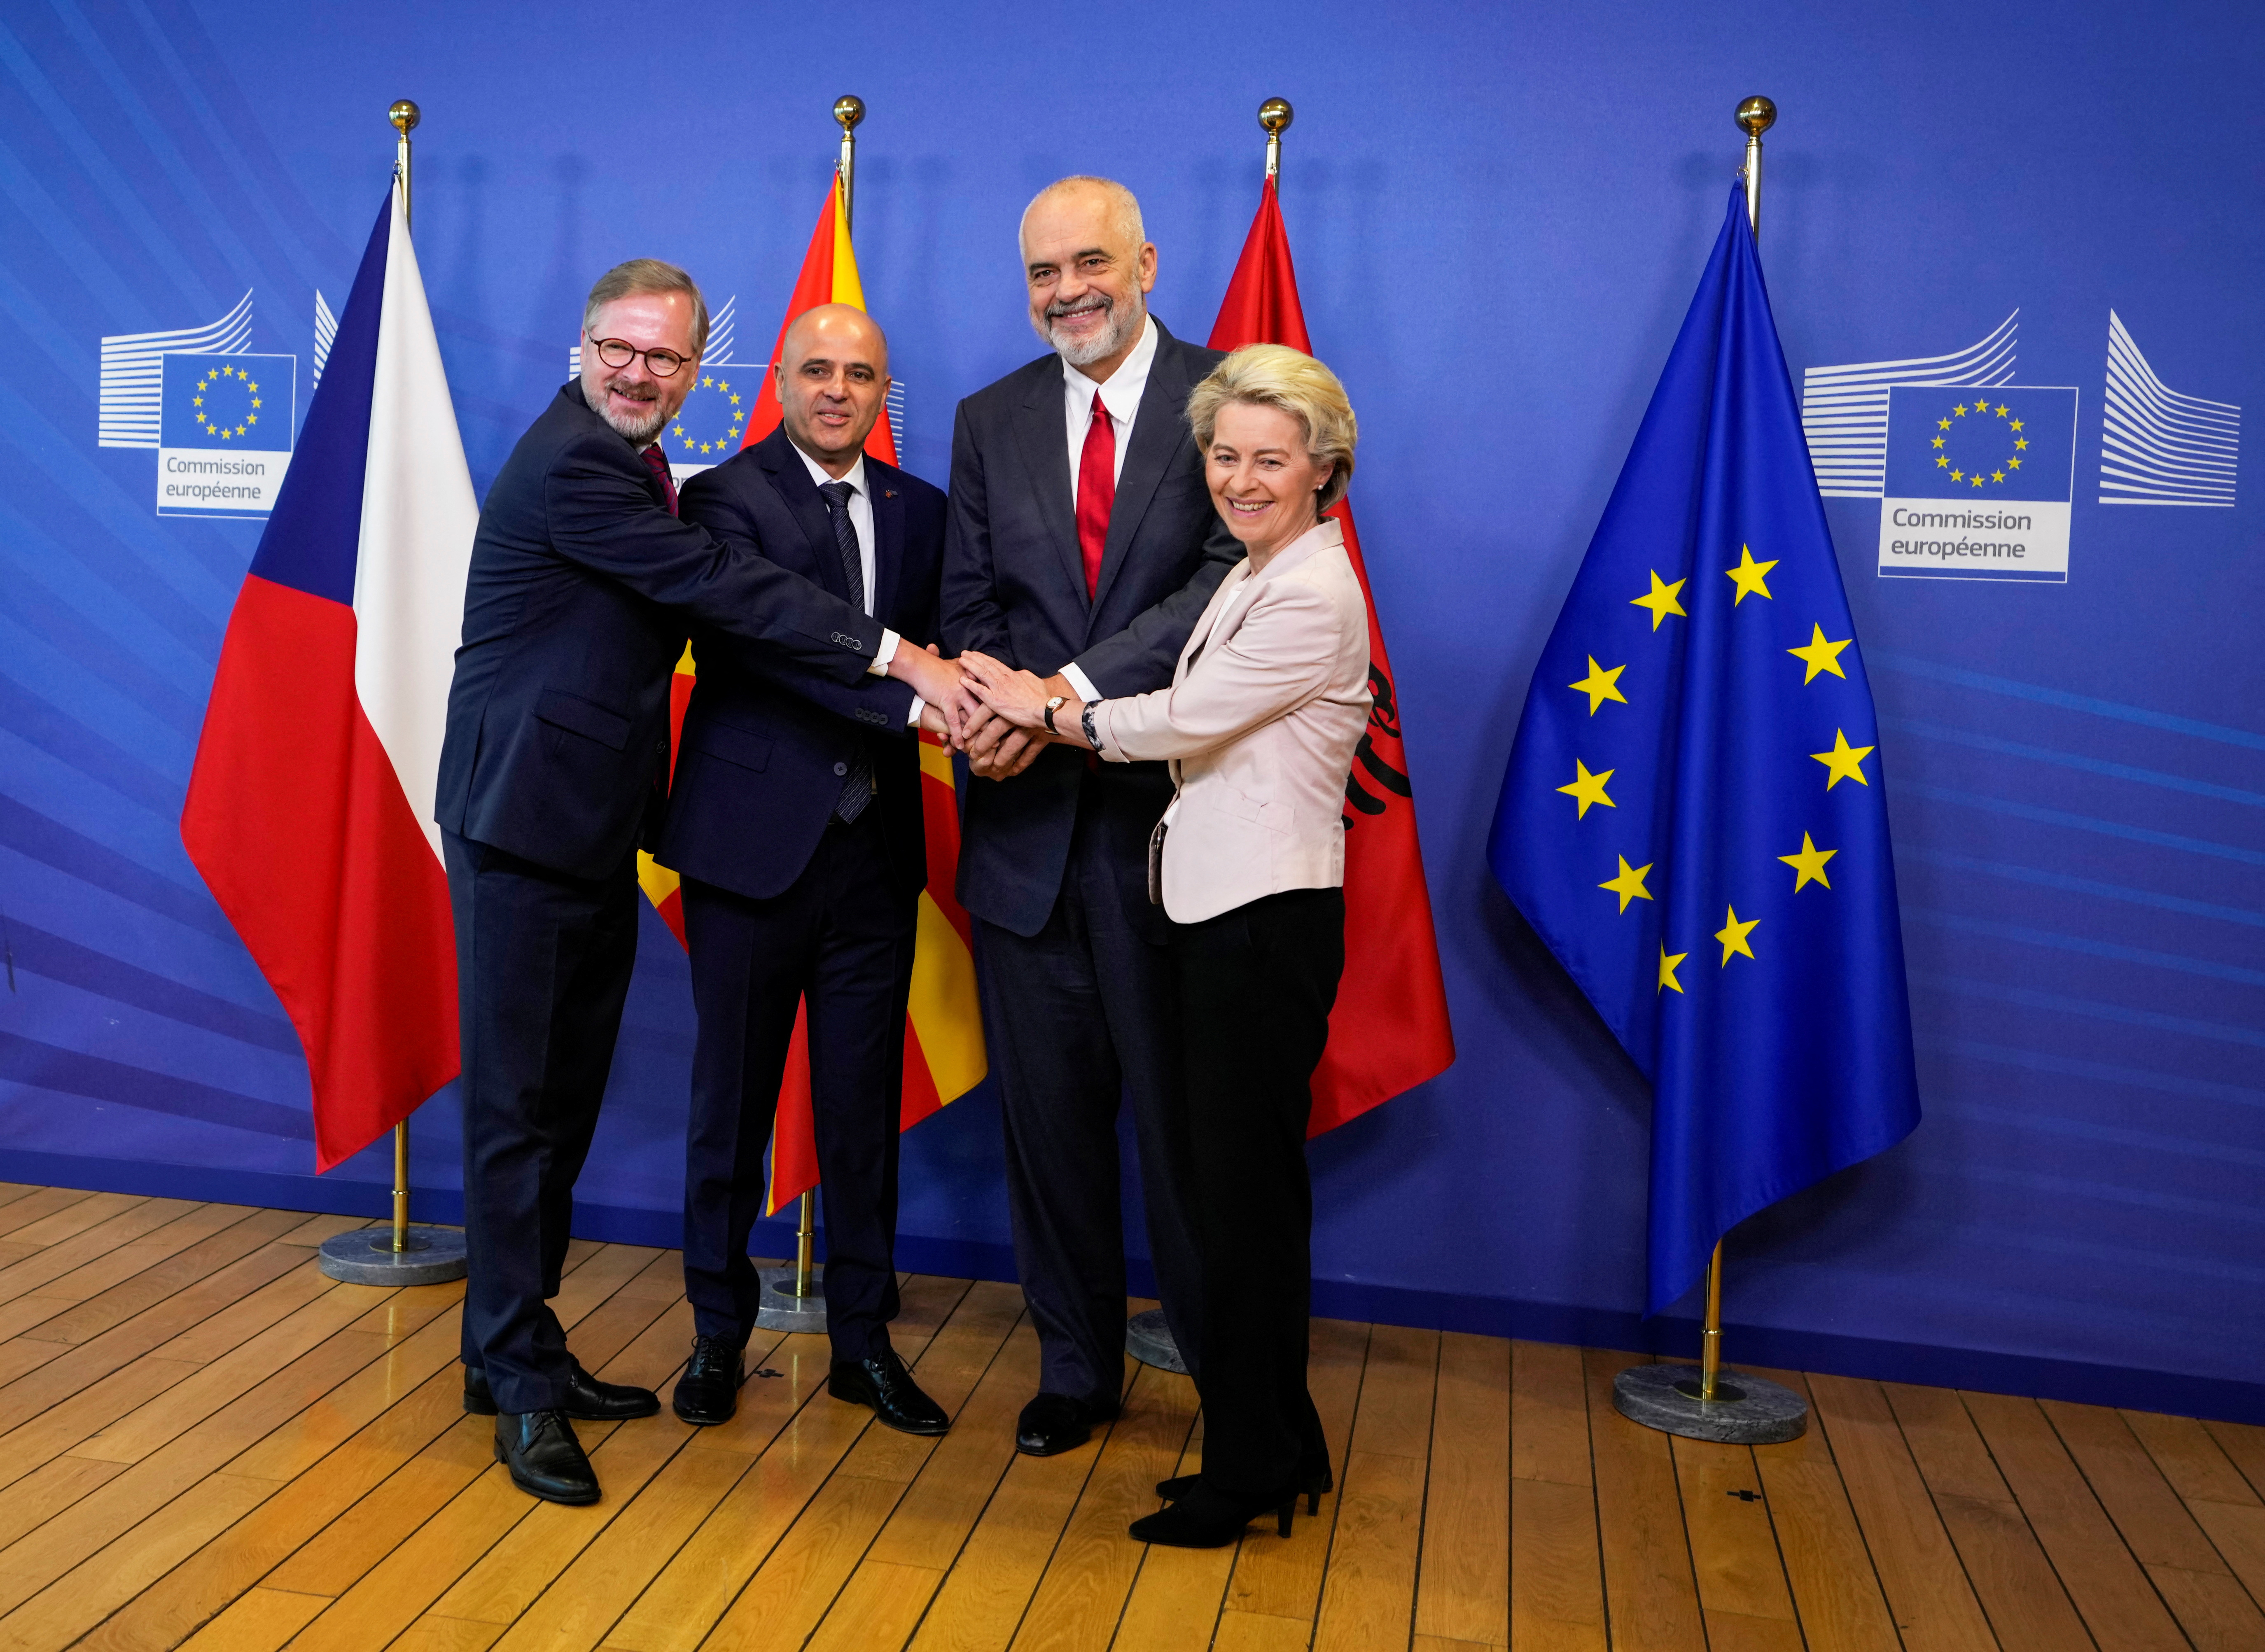 Czech Prime Minister Fiala, North Macedonian Prime Minister Kovacevski and Albanian Prime Minister Rama are welcomed by EC President von der Leyen in Brussels